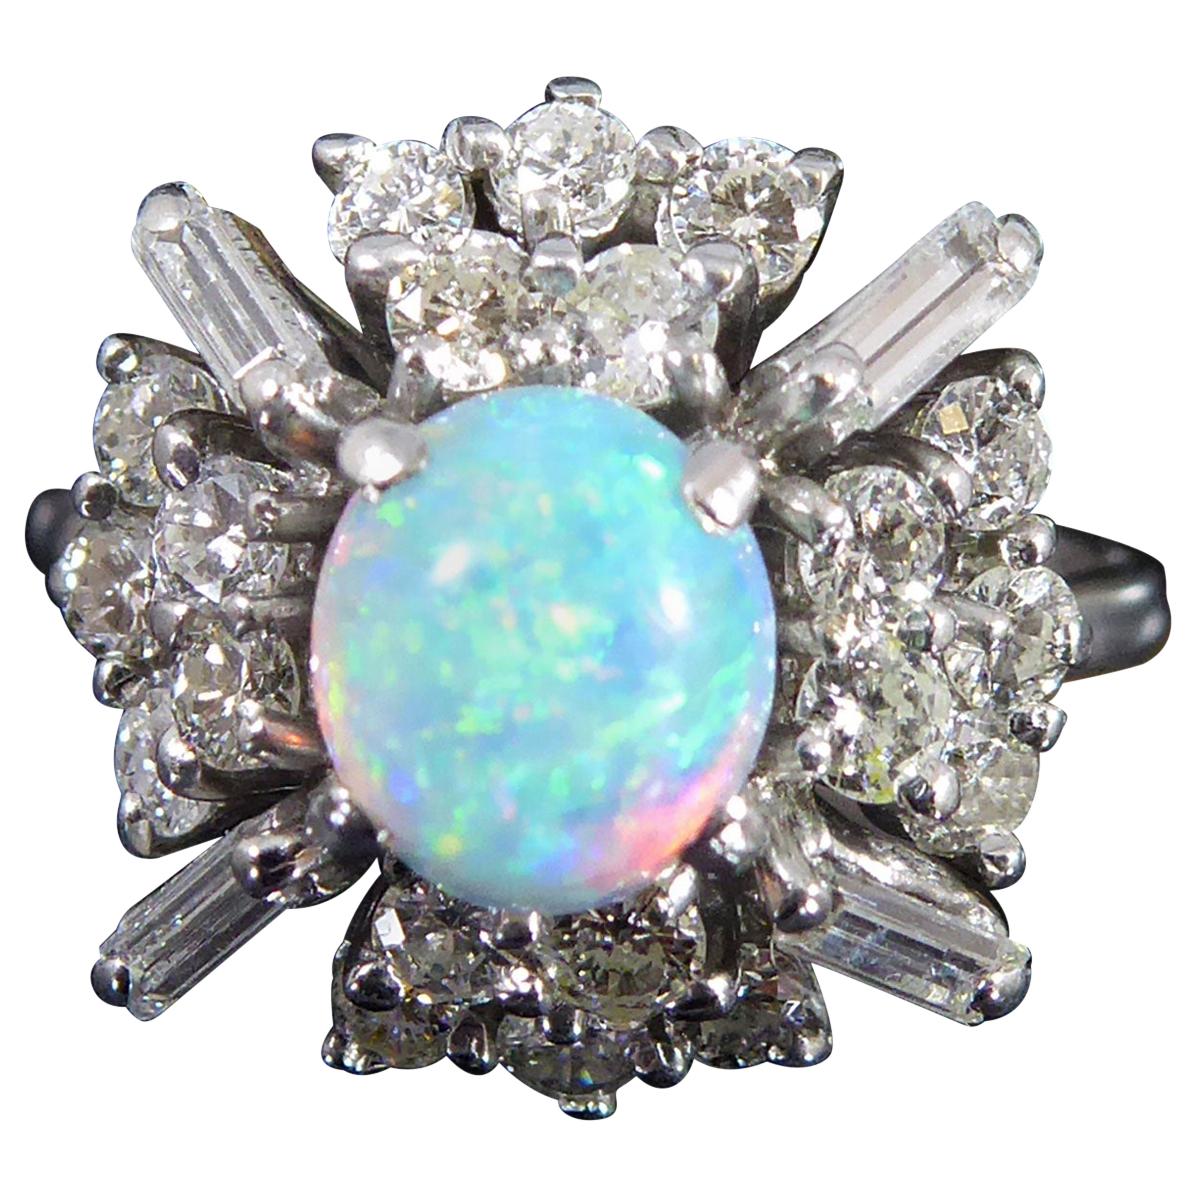 Vintage 0.64 Carat Opal and Diamond Cluster Ring, White Gold, Mid-20th Century